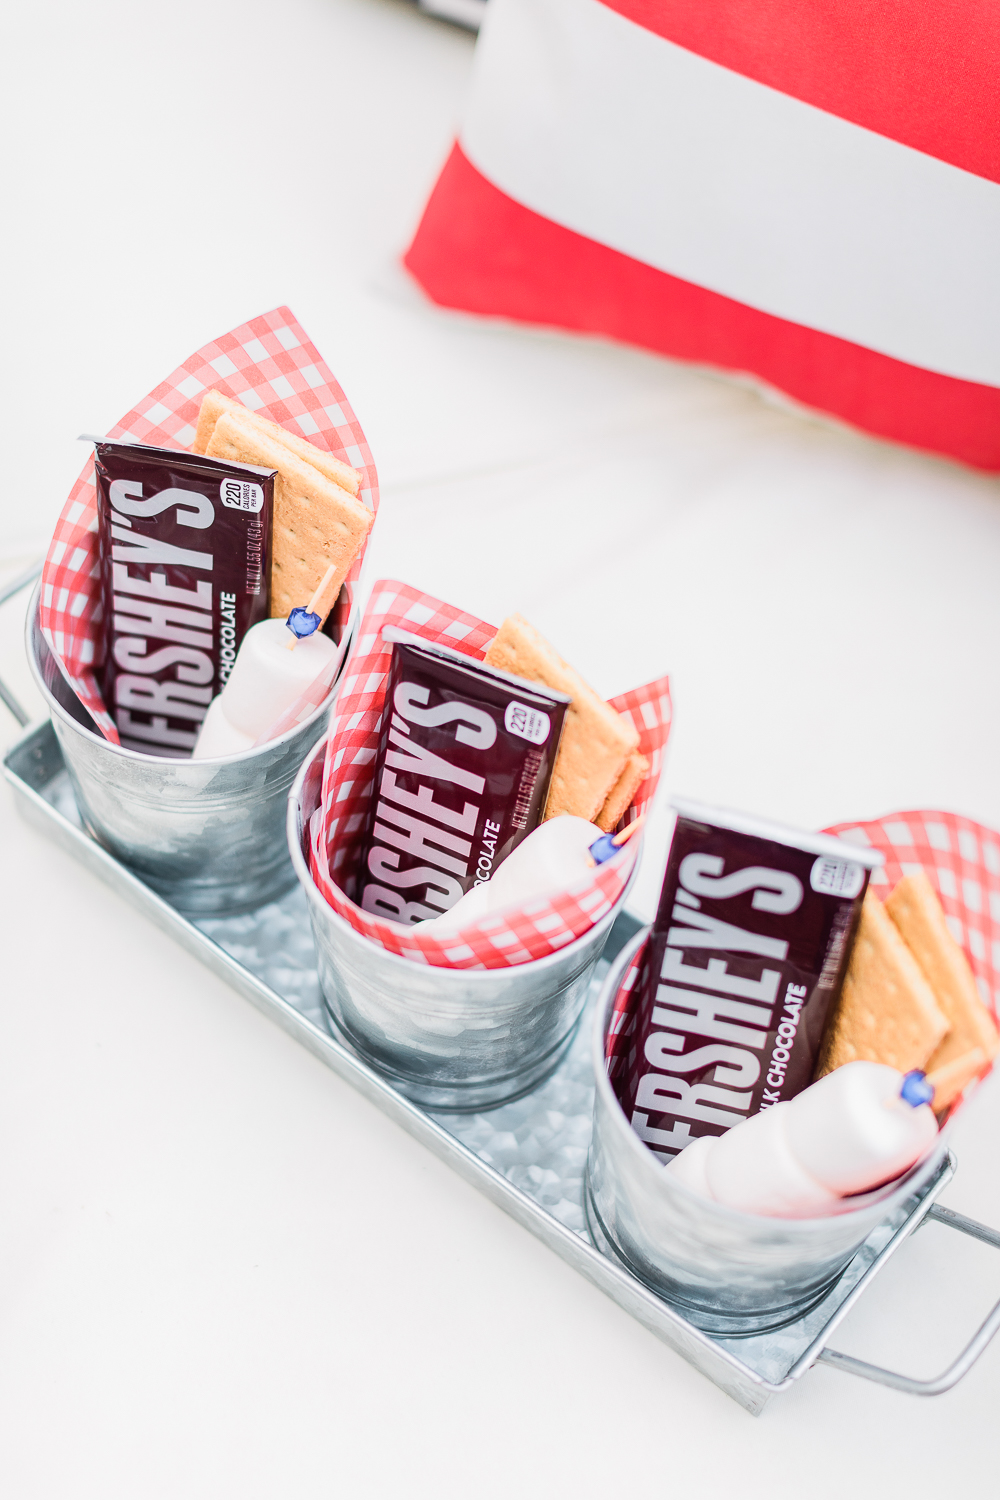 The cutest mini smores kits for summer parties and bonfires created by southern lifestyle blogger Stephanie Ziajka on Diary of a Debutante